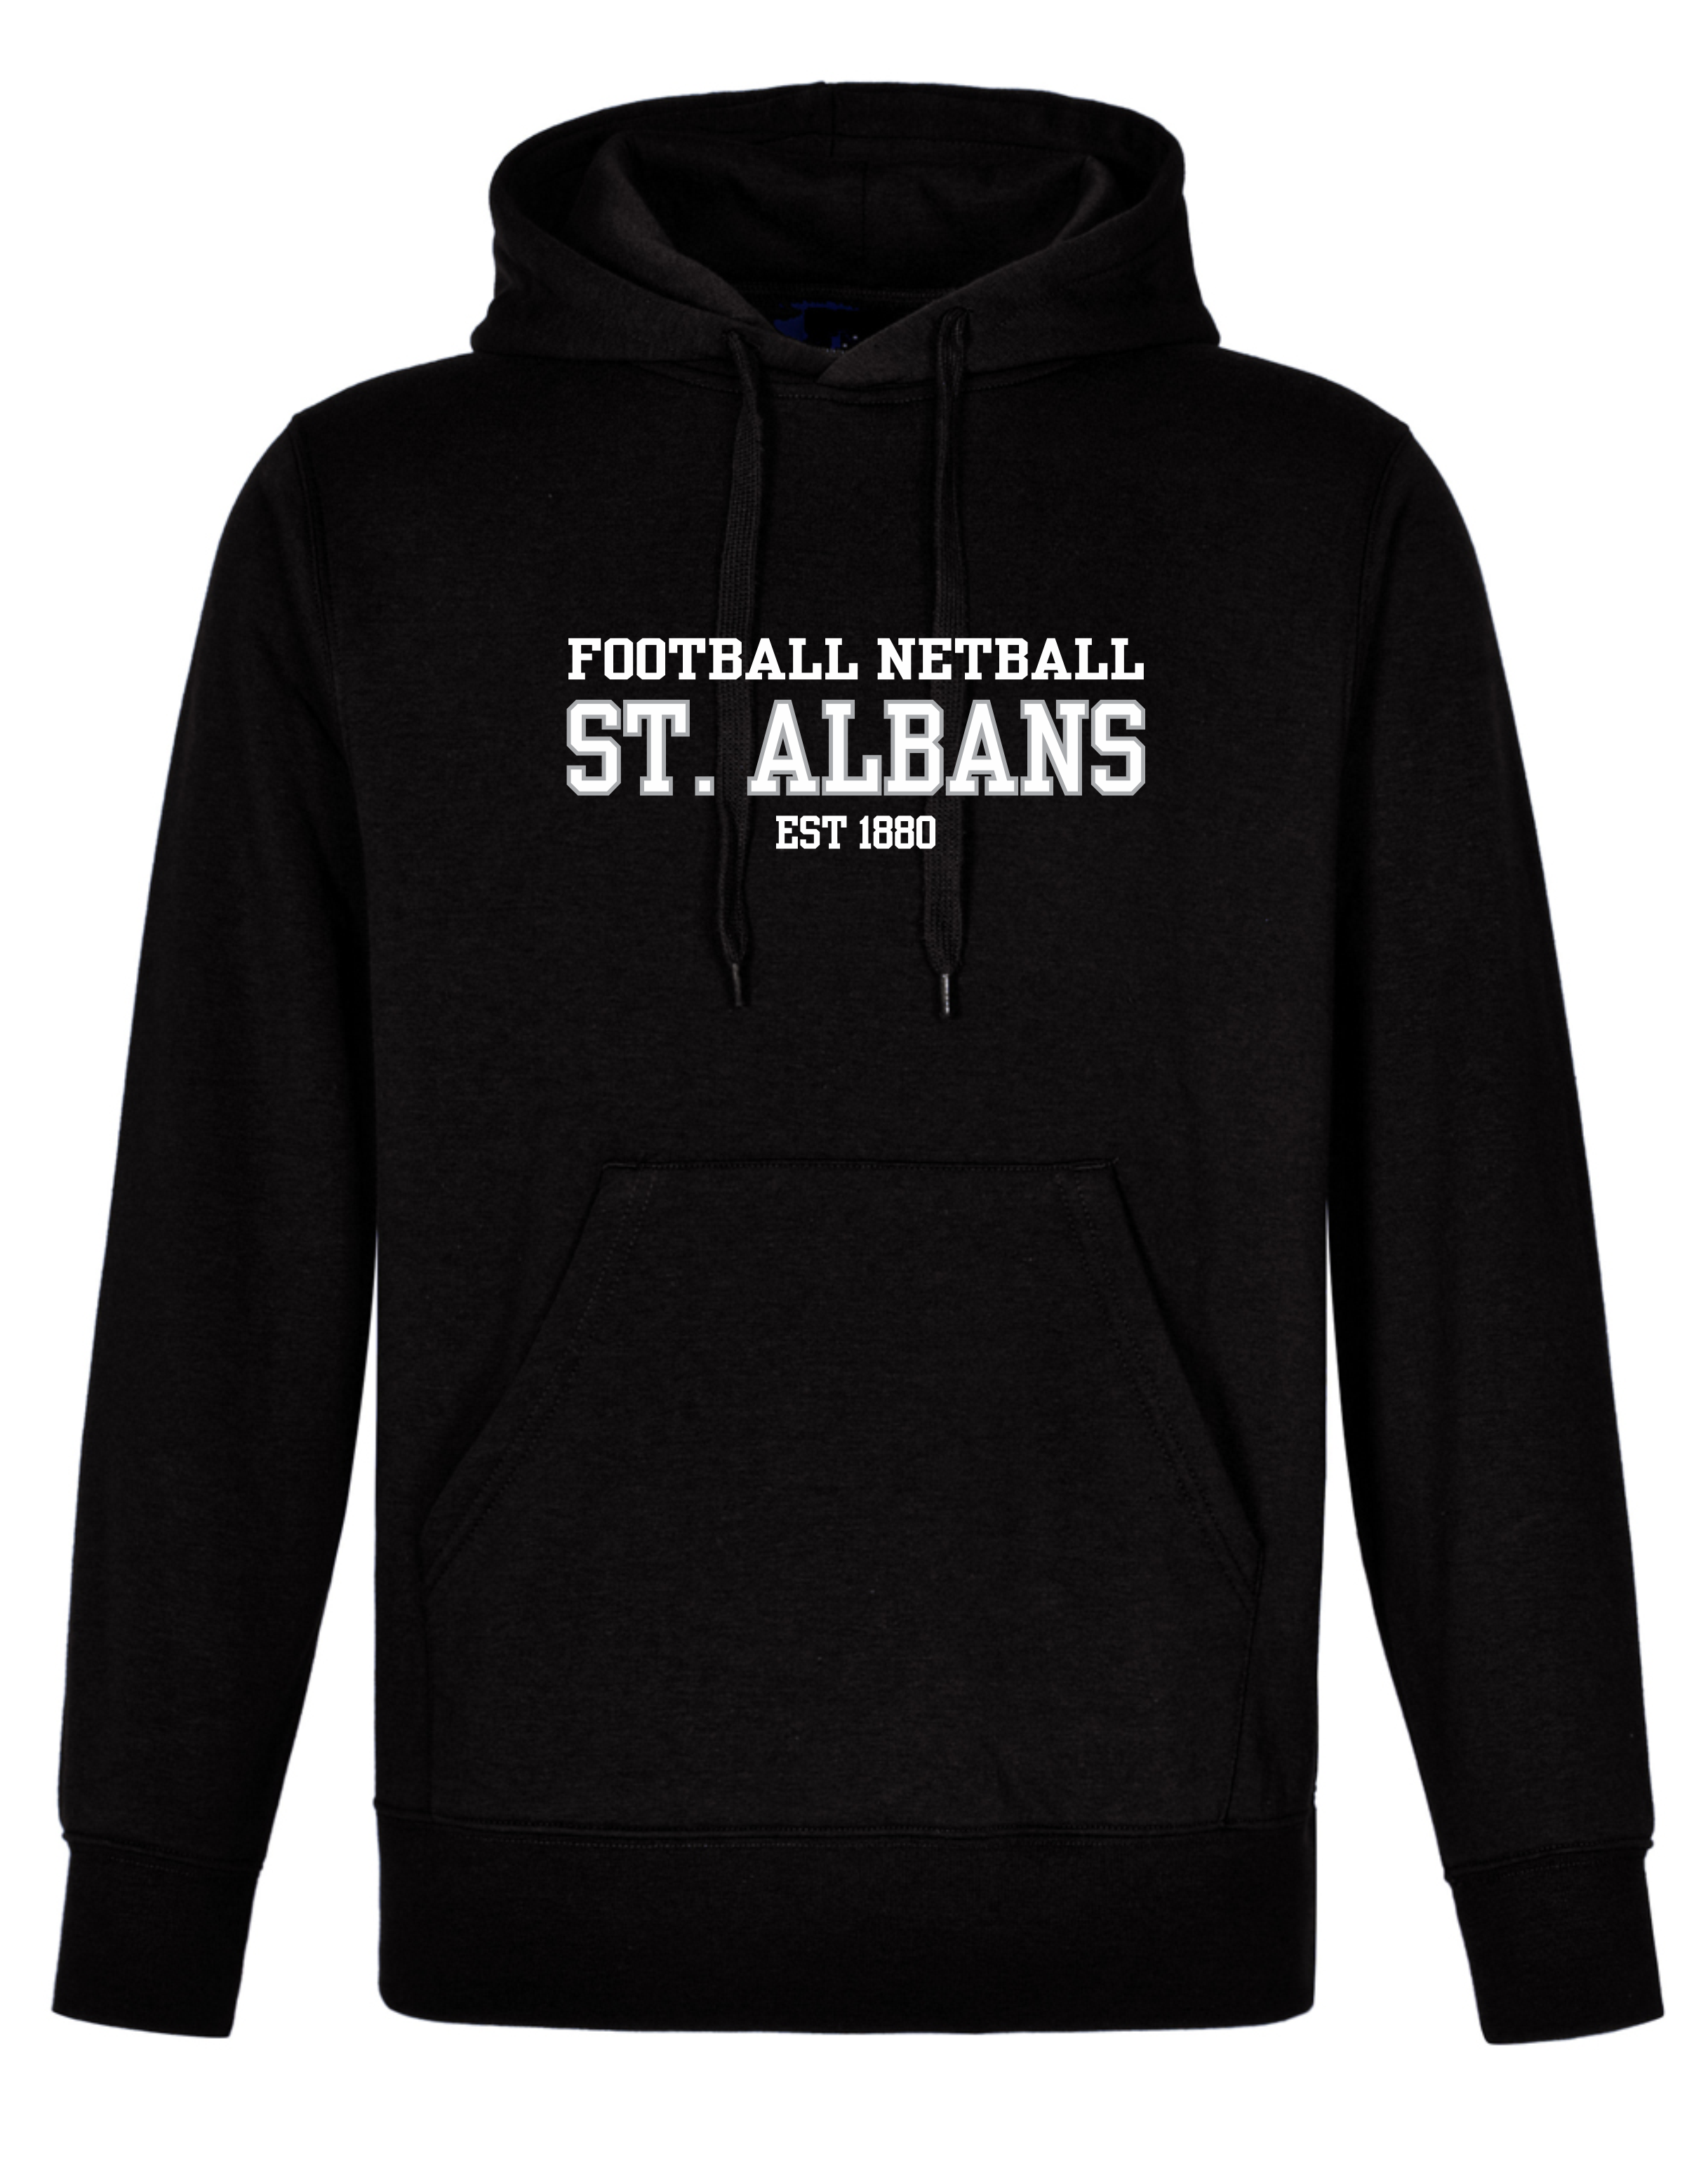 Adults Unisex Hoodie with Large Chest Logo